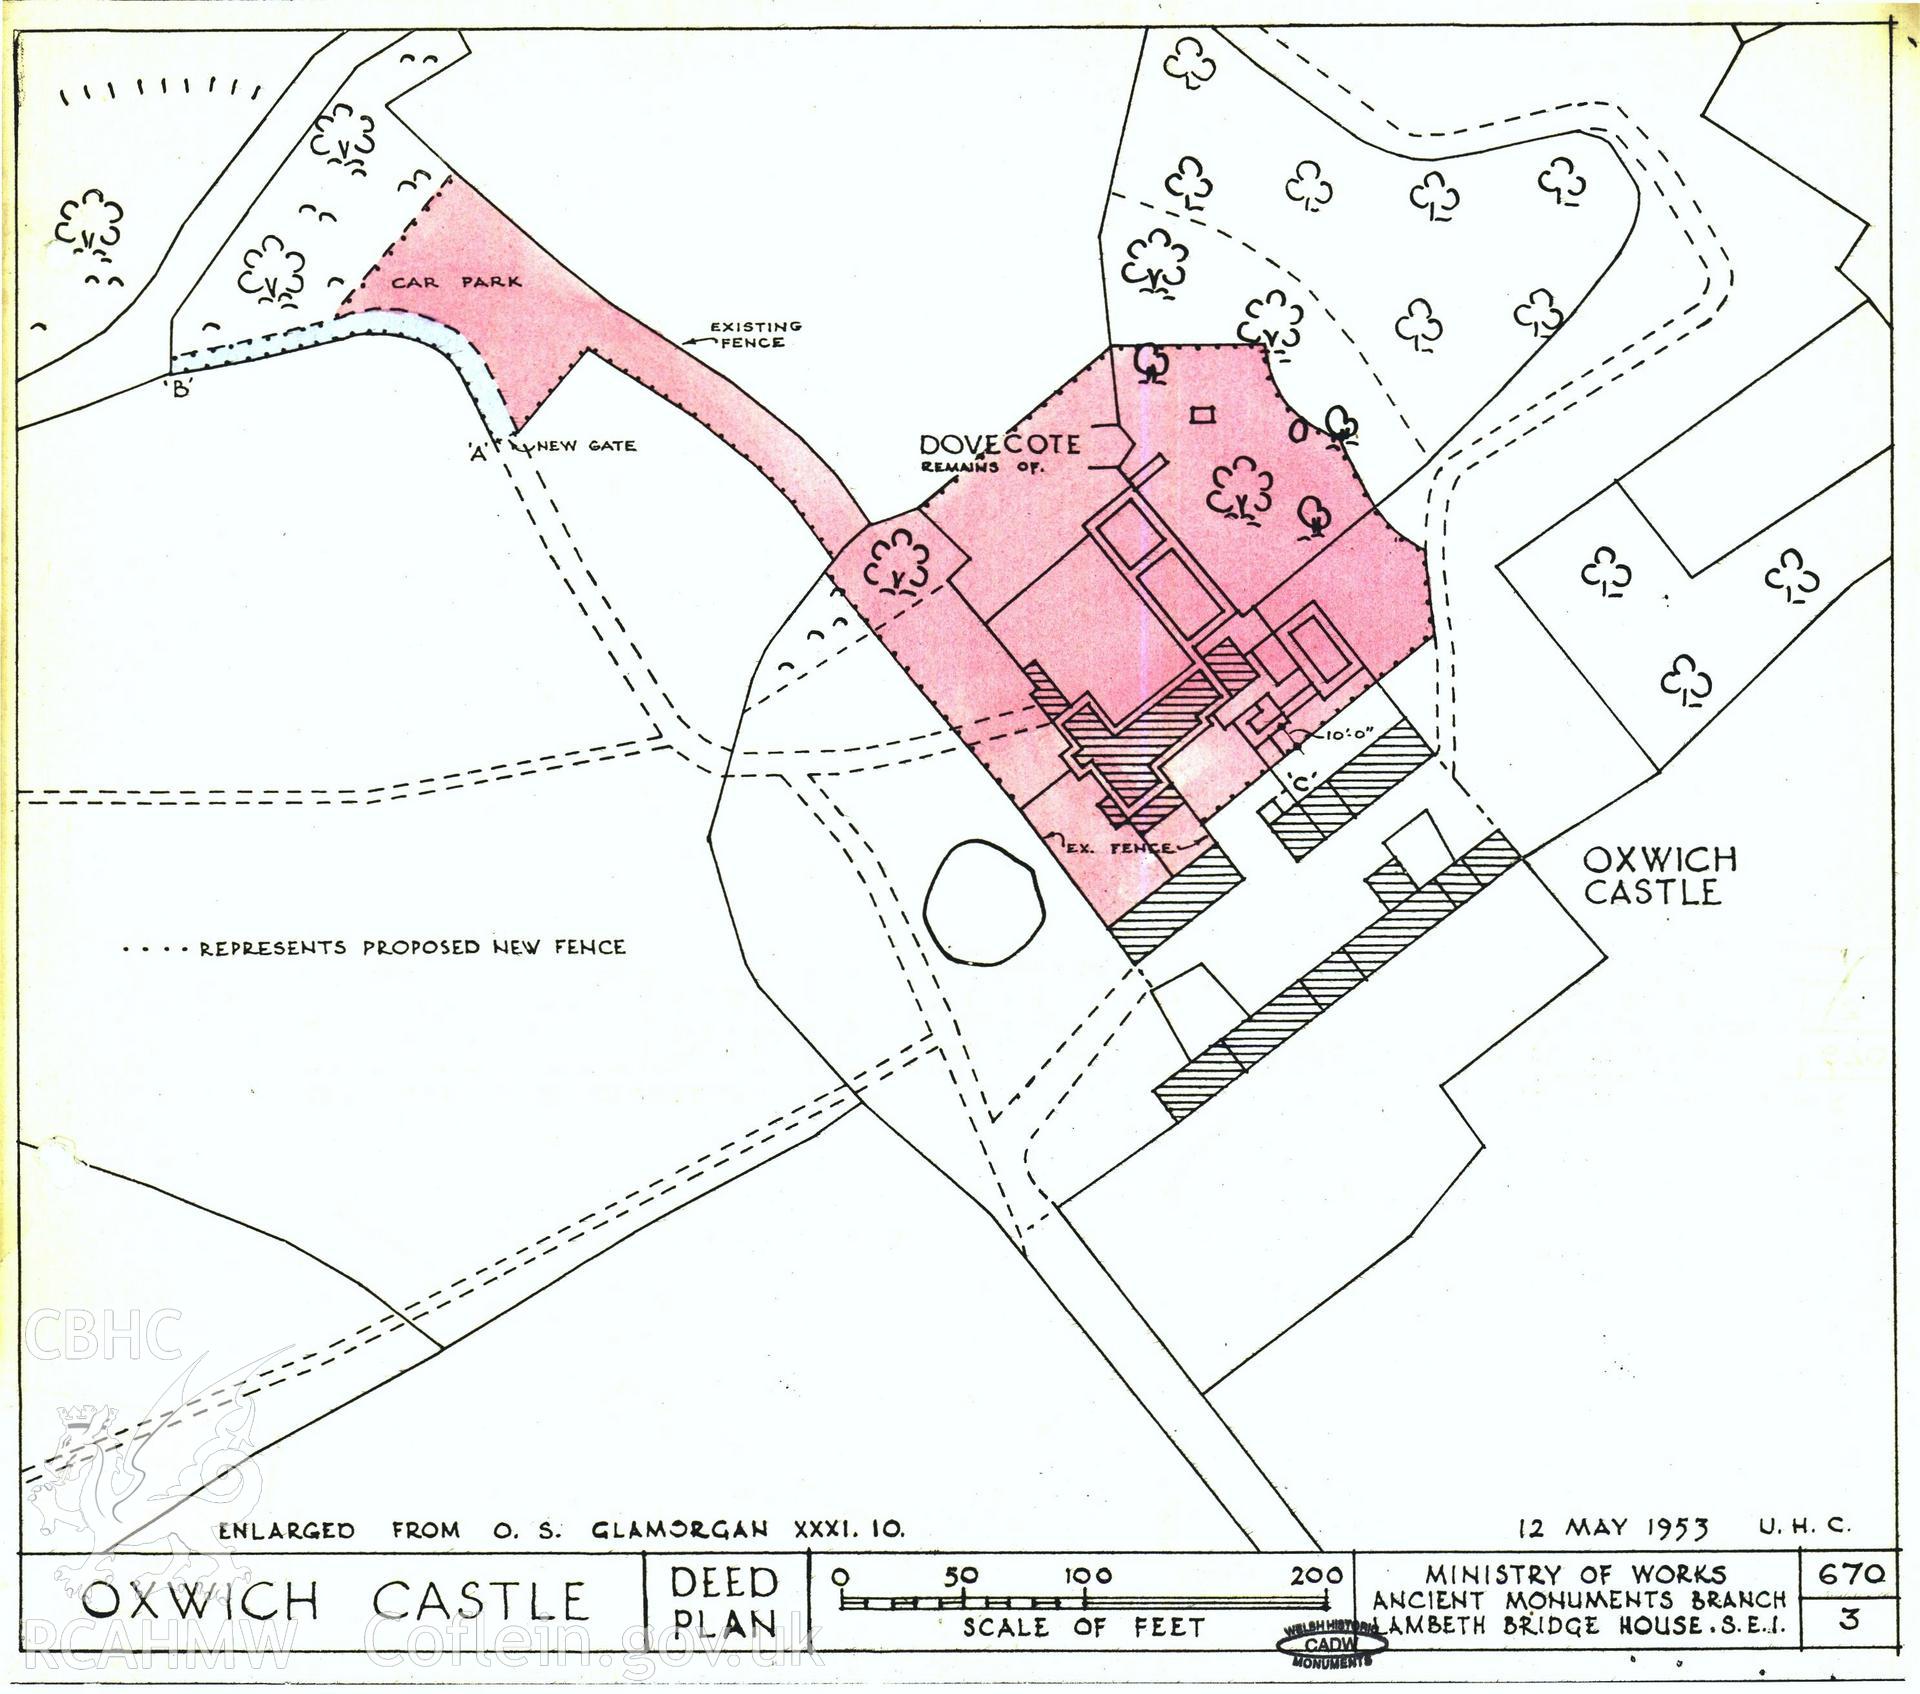 Cadw guardianship monument drawing of Oxwich Castle. Deed plan. Cadw Ref. No:670/3. Scale 1:630.